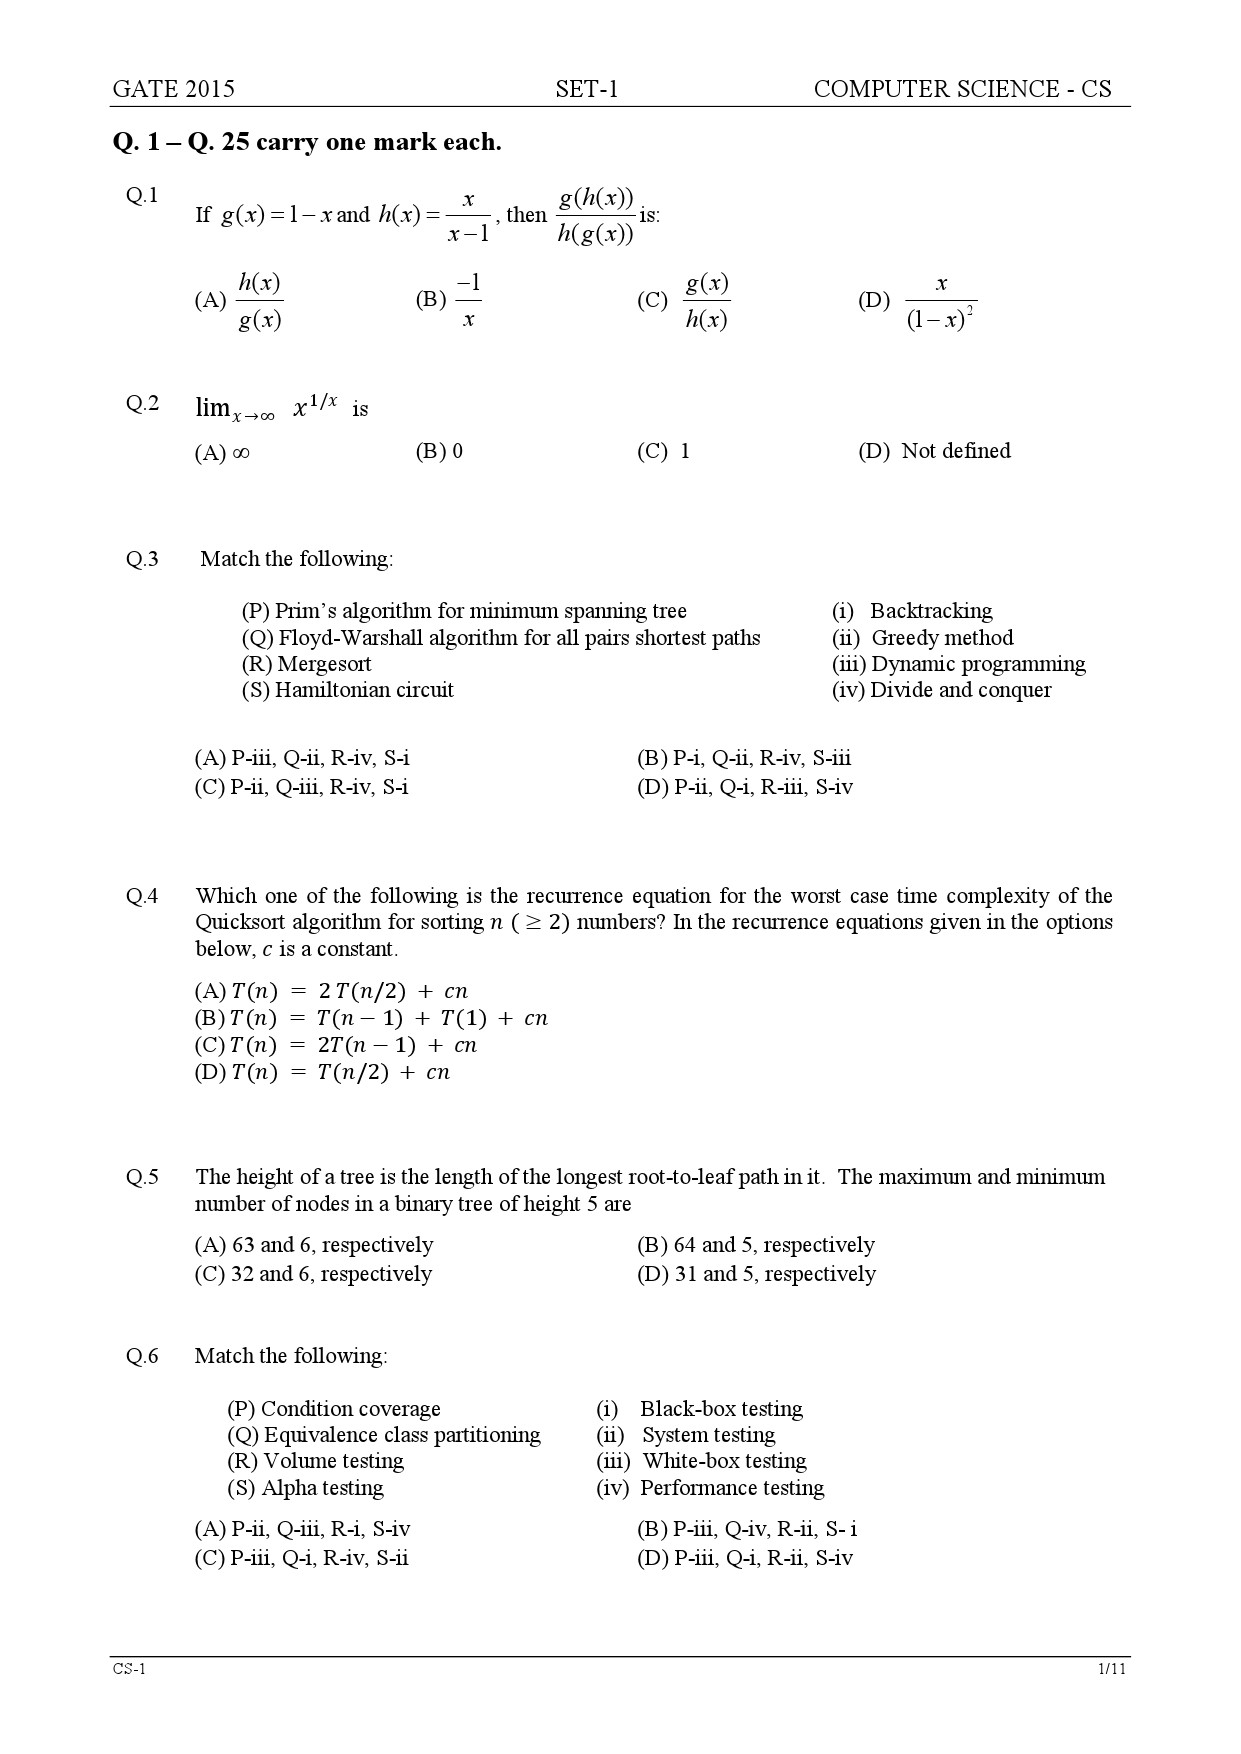 GATE Exam Question Paper 2015 Computer Science and Information Technology Set 1 1